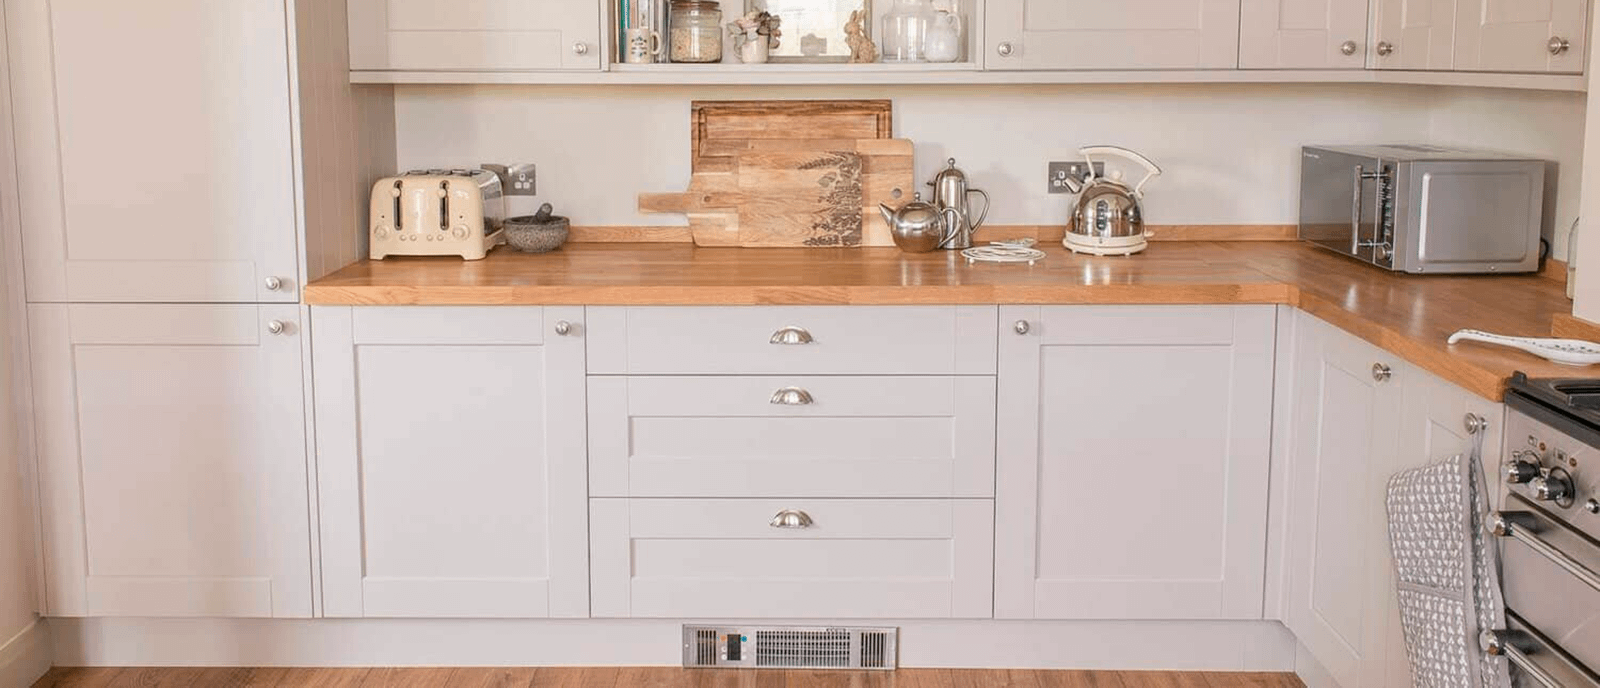 White kitchen cabinets with a plinth heater